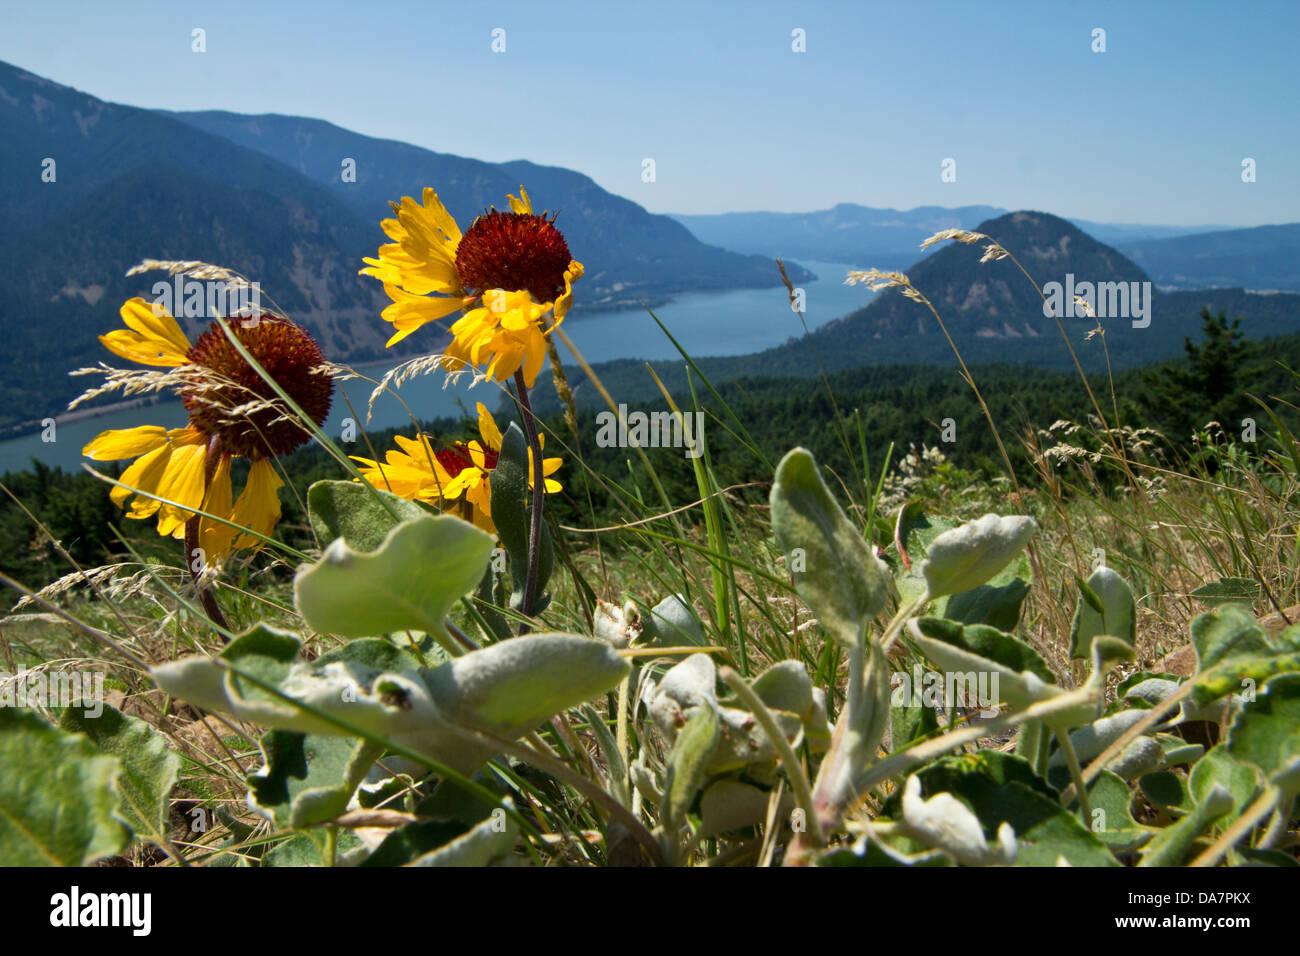 Fragile flowers in the wind on a mountaintop overlooking a river Stock Photo